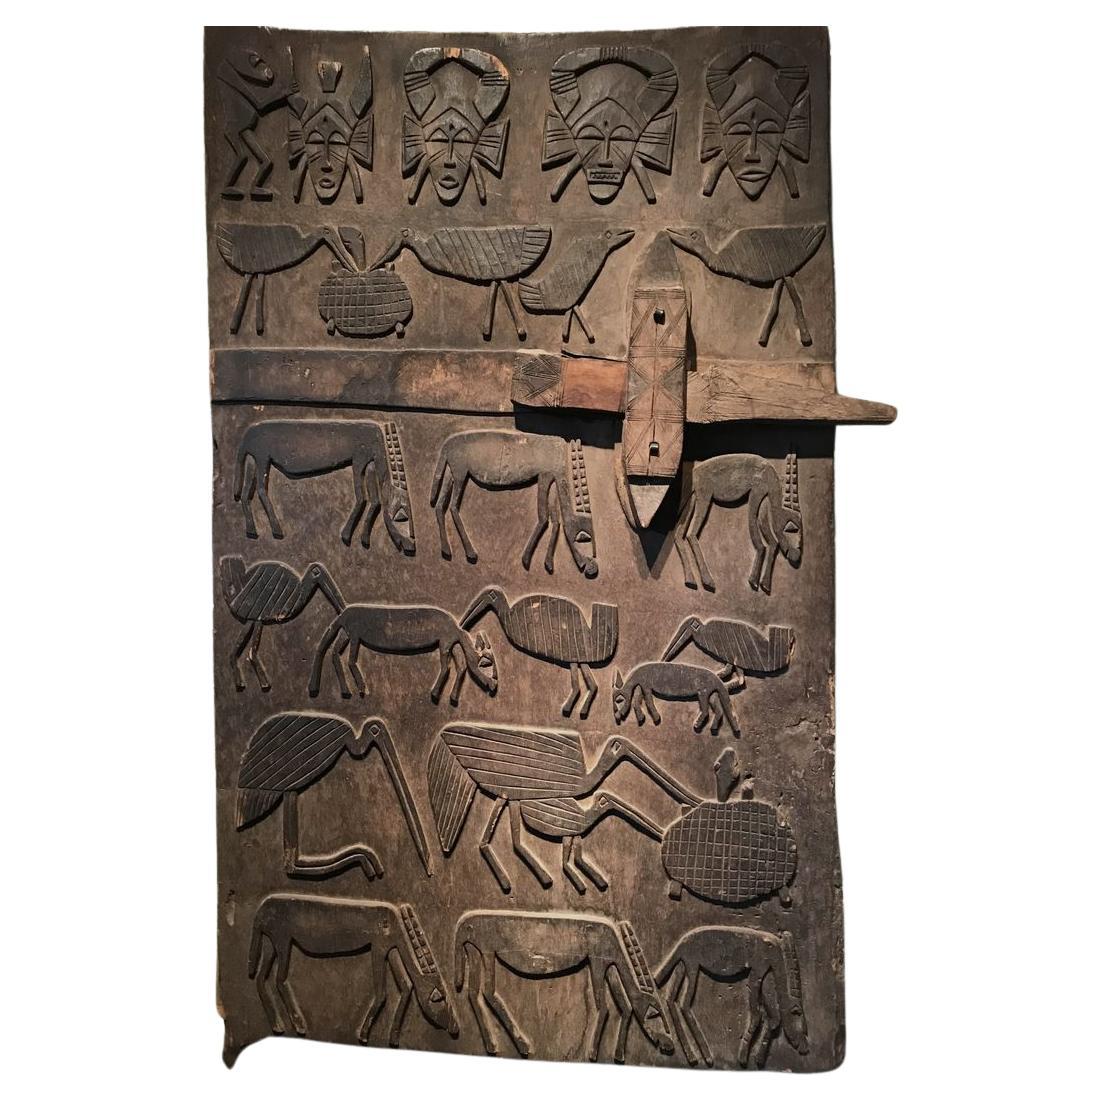 Senufo Granary Door Depicting Series of Animals and Masks For Sale